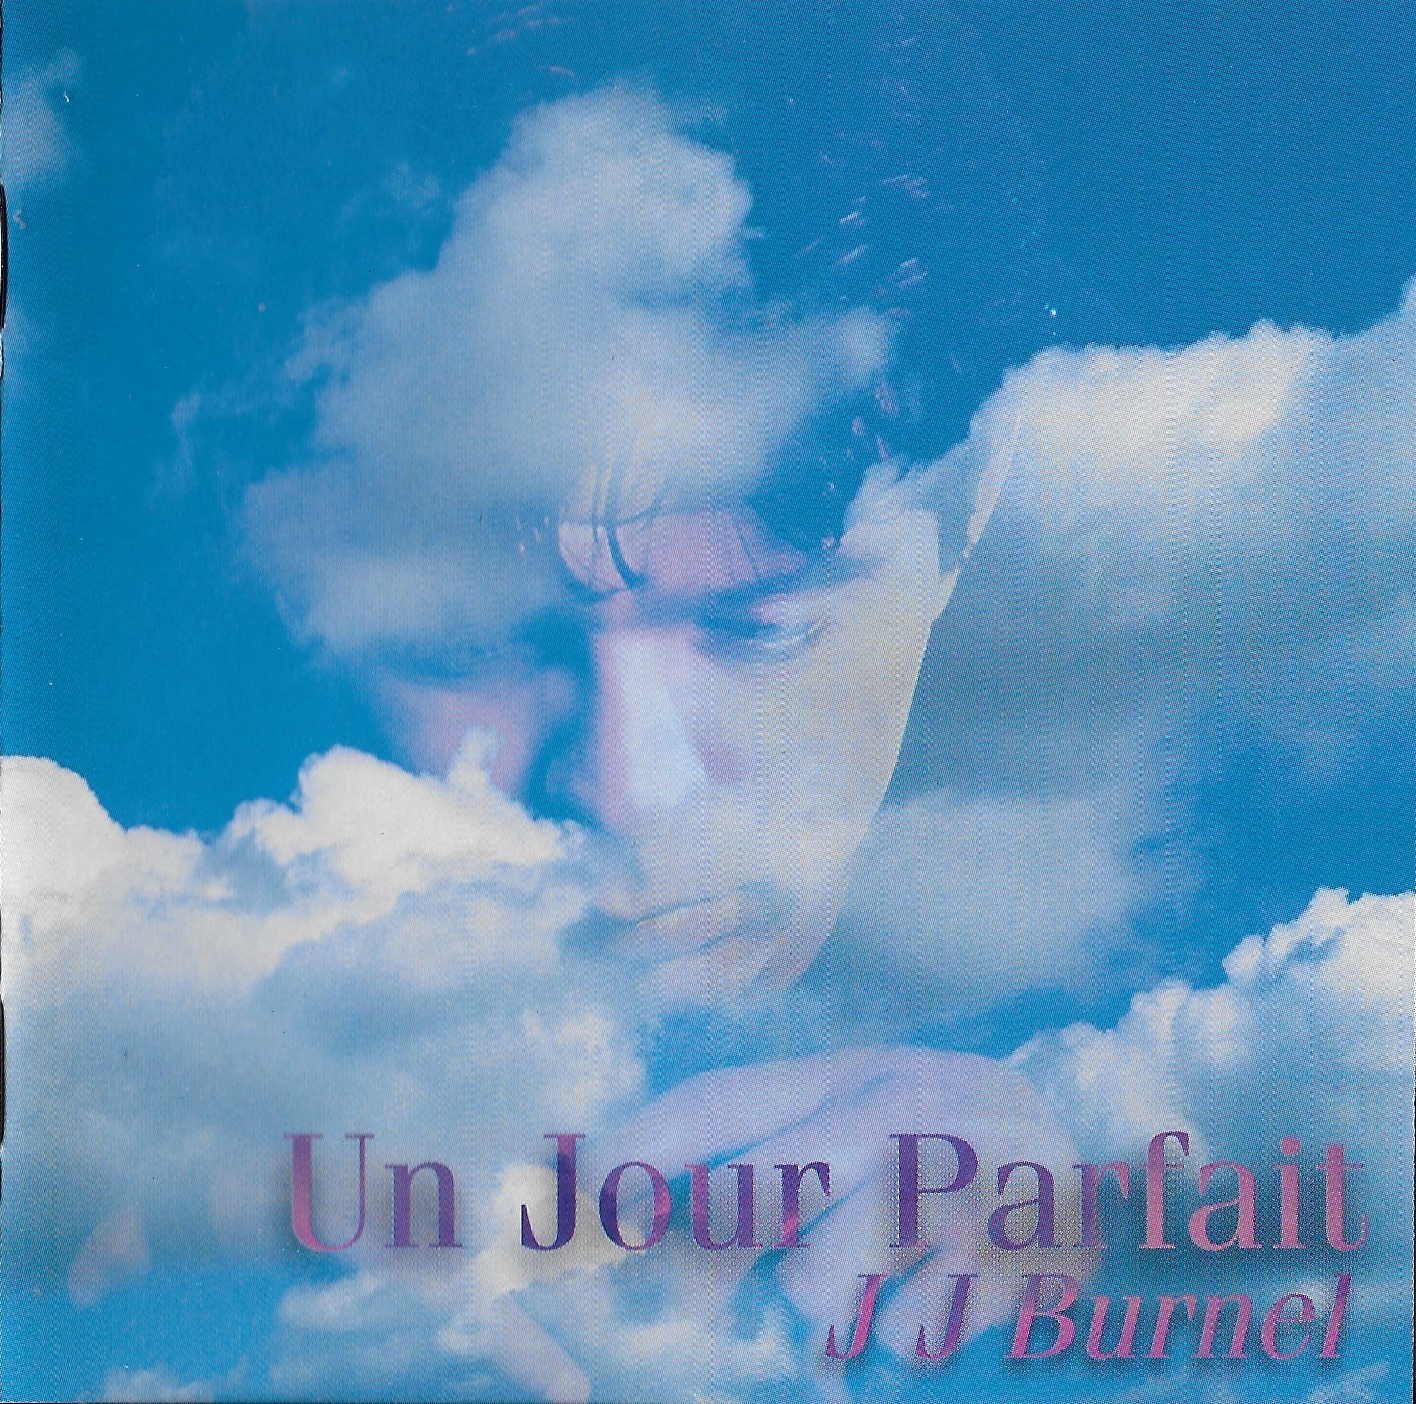 Picture of SISCD 002 Un jour parfait by artist Jean Jacques Burnel from The Stranglers cds